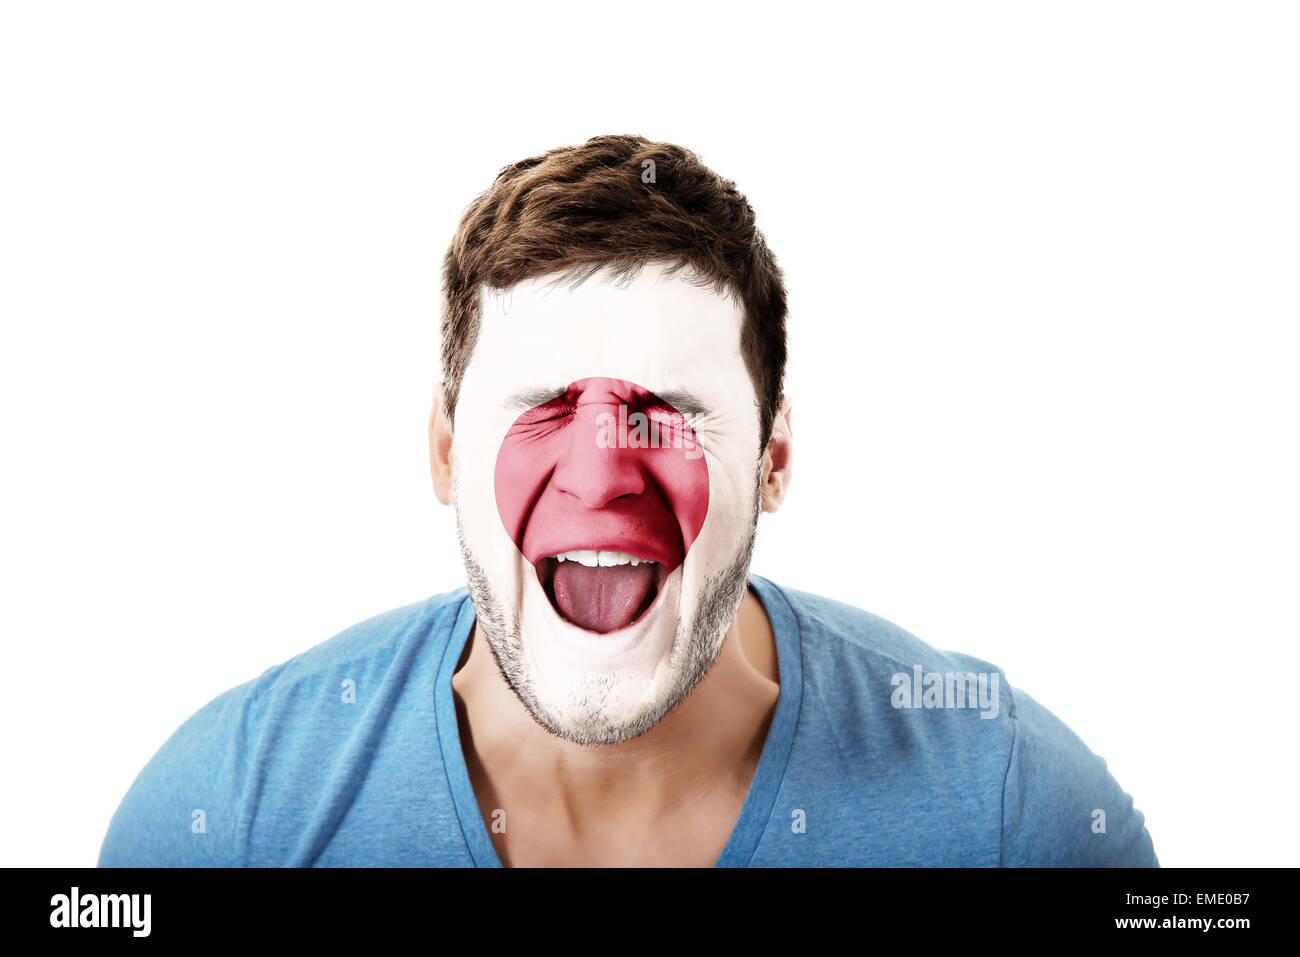 Screaming man with Japan flag on face. Stock Photo